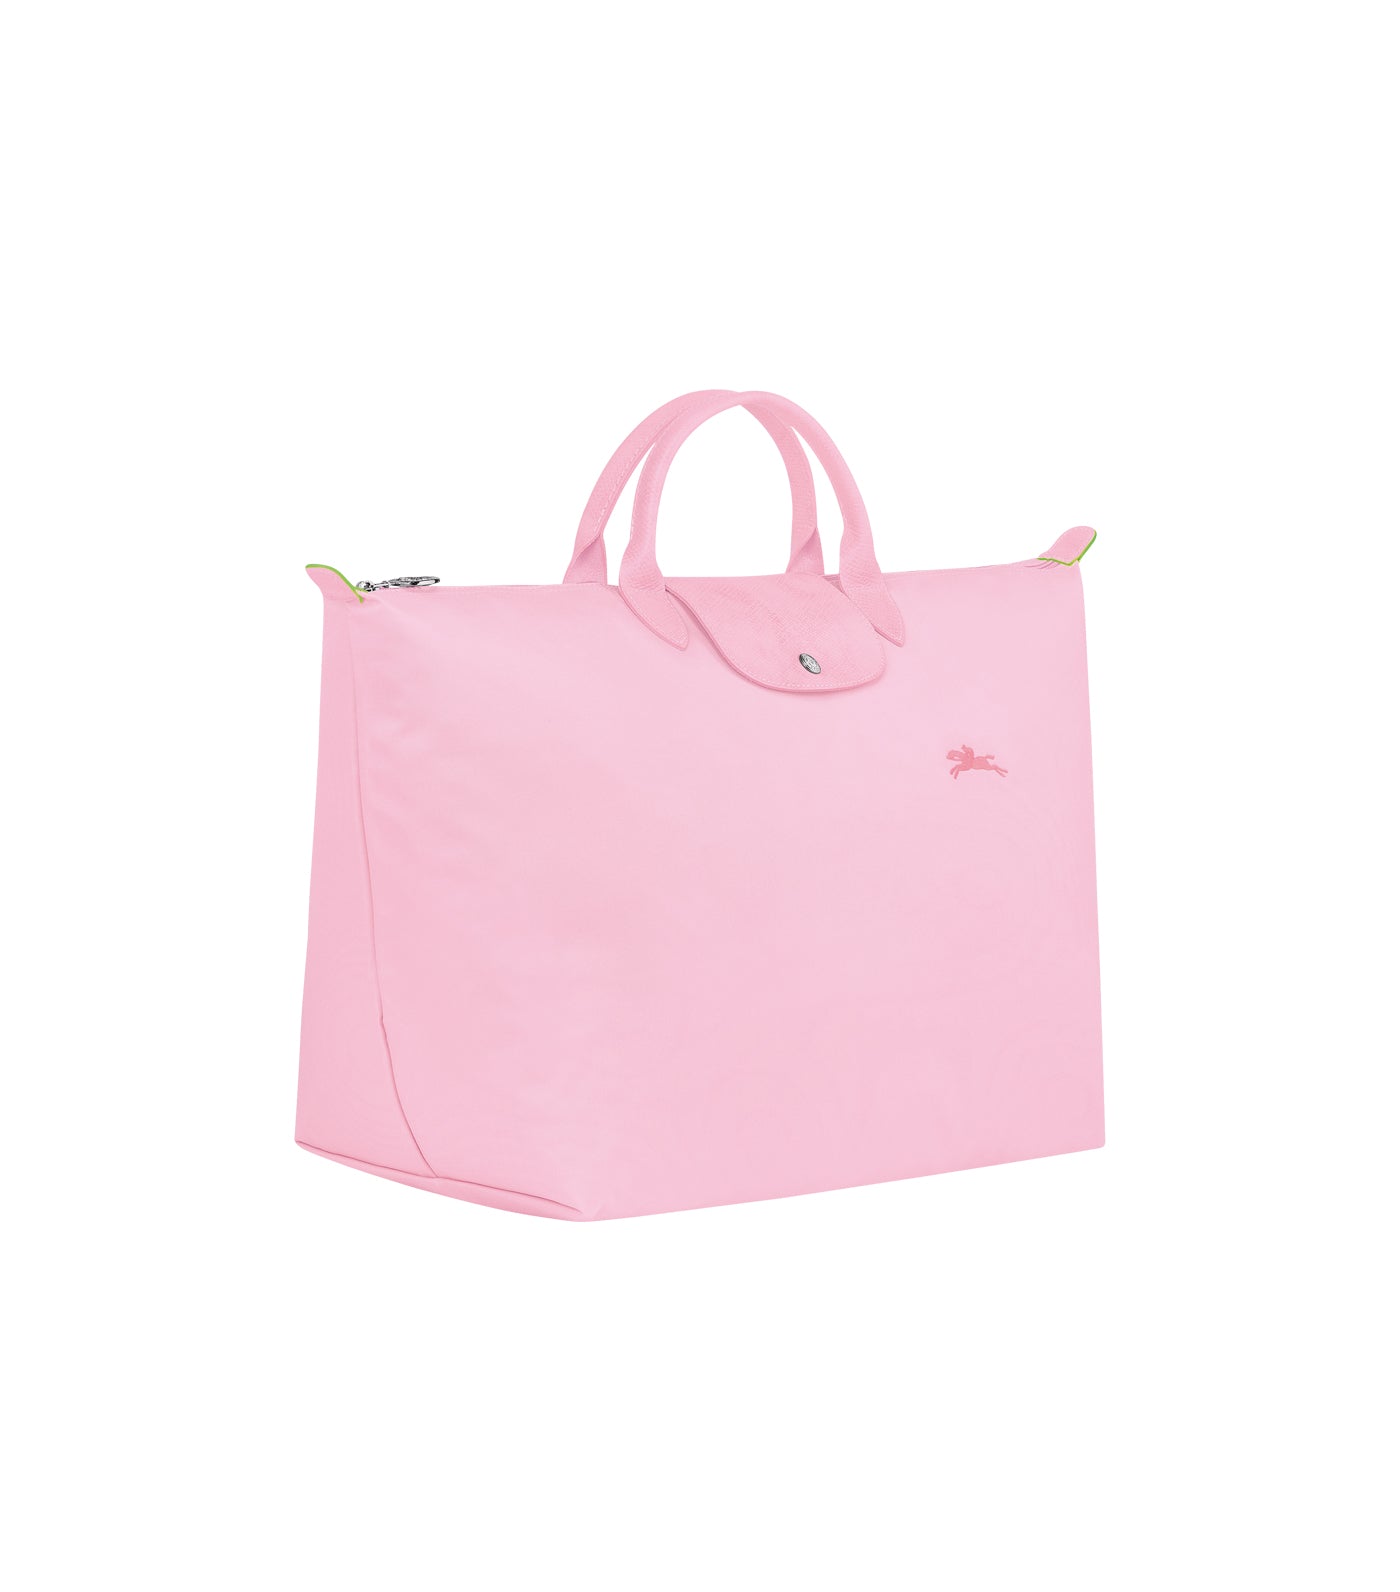 Le Pliage Green Travel Bag S Pink